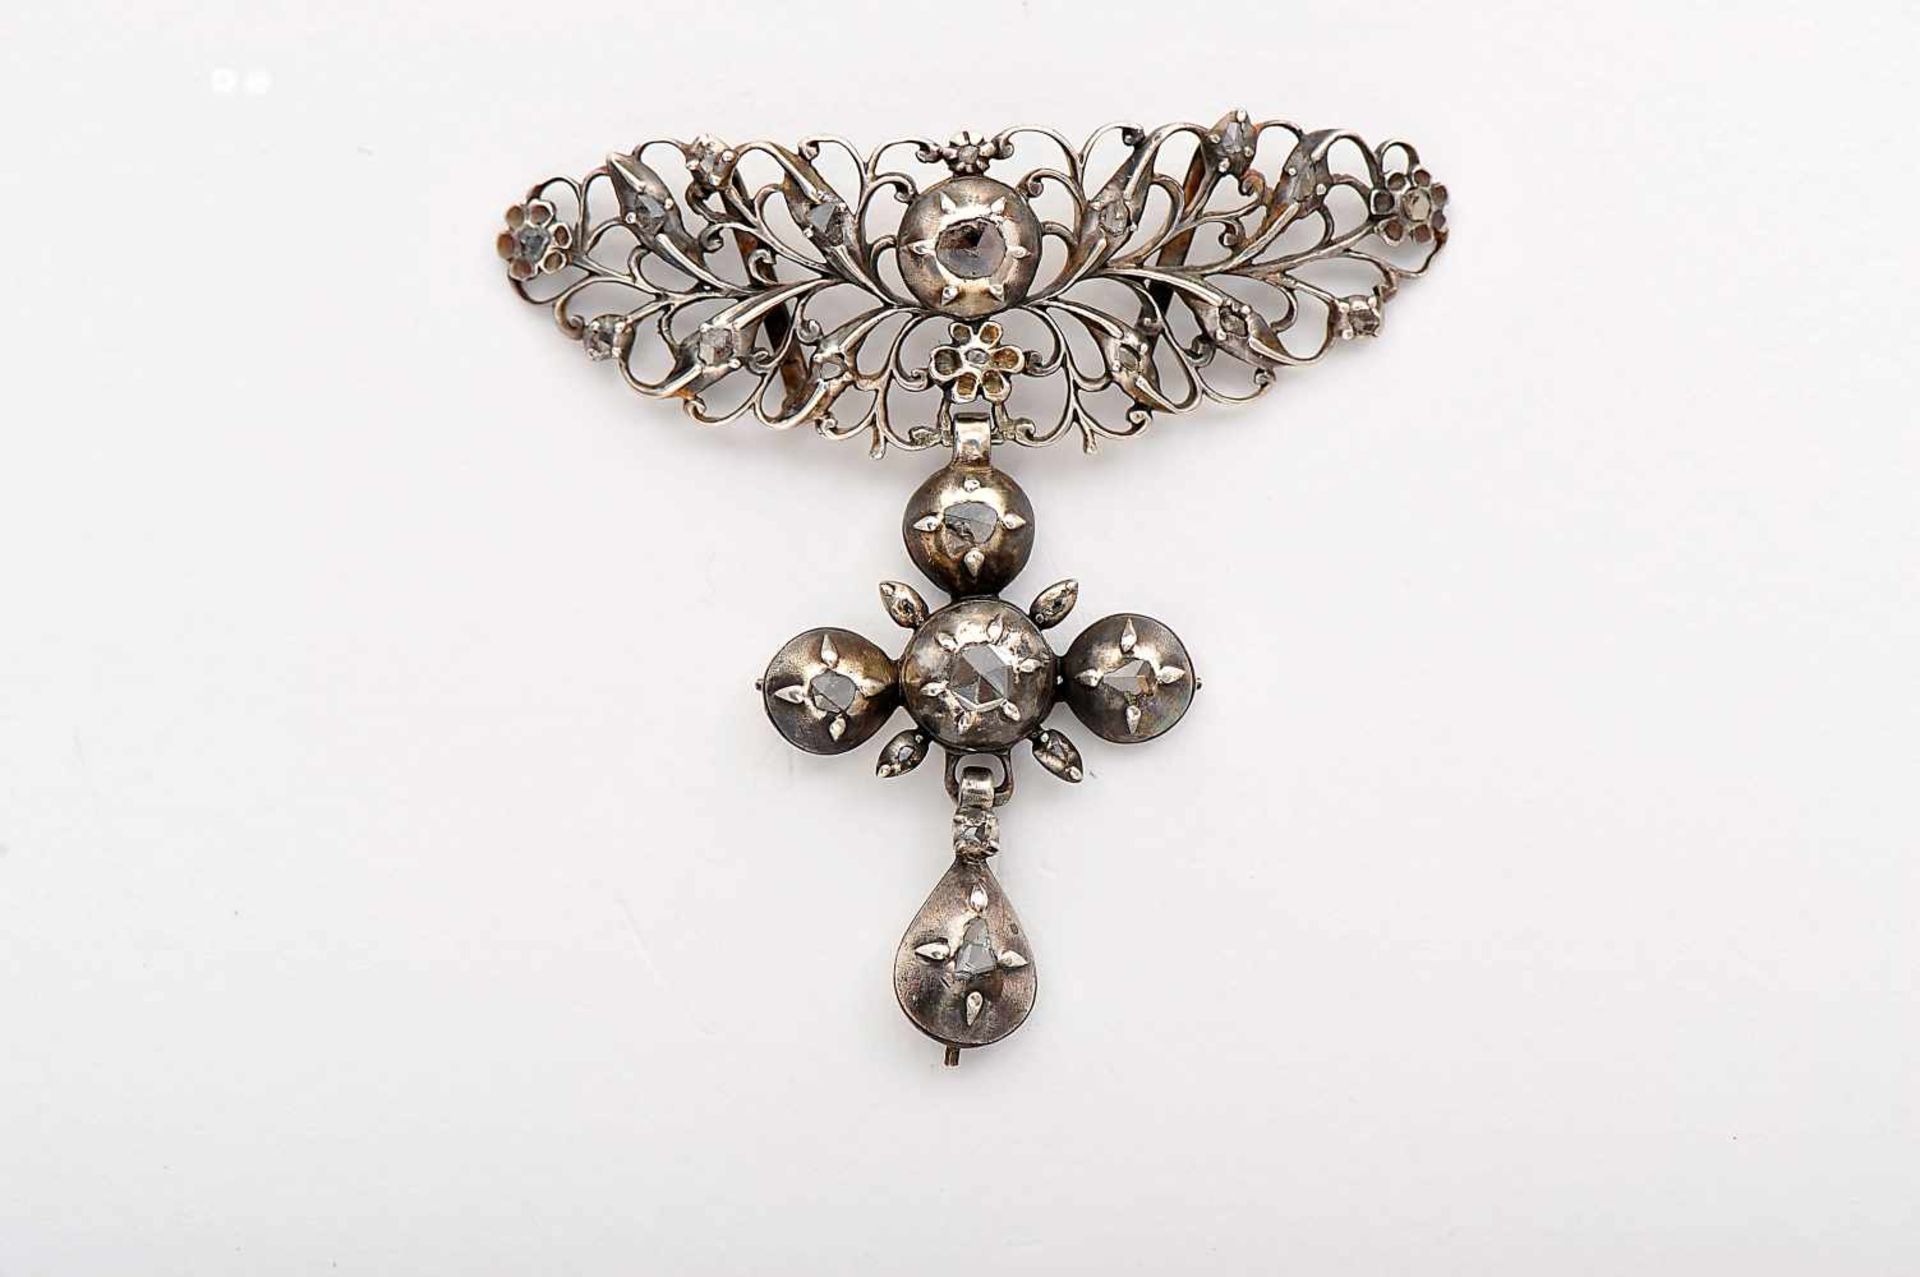 A Pendant, silver, set with rose cut diamonds, European, 18th/19th C., signs of use,